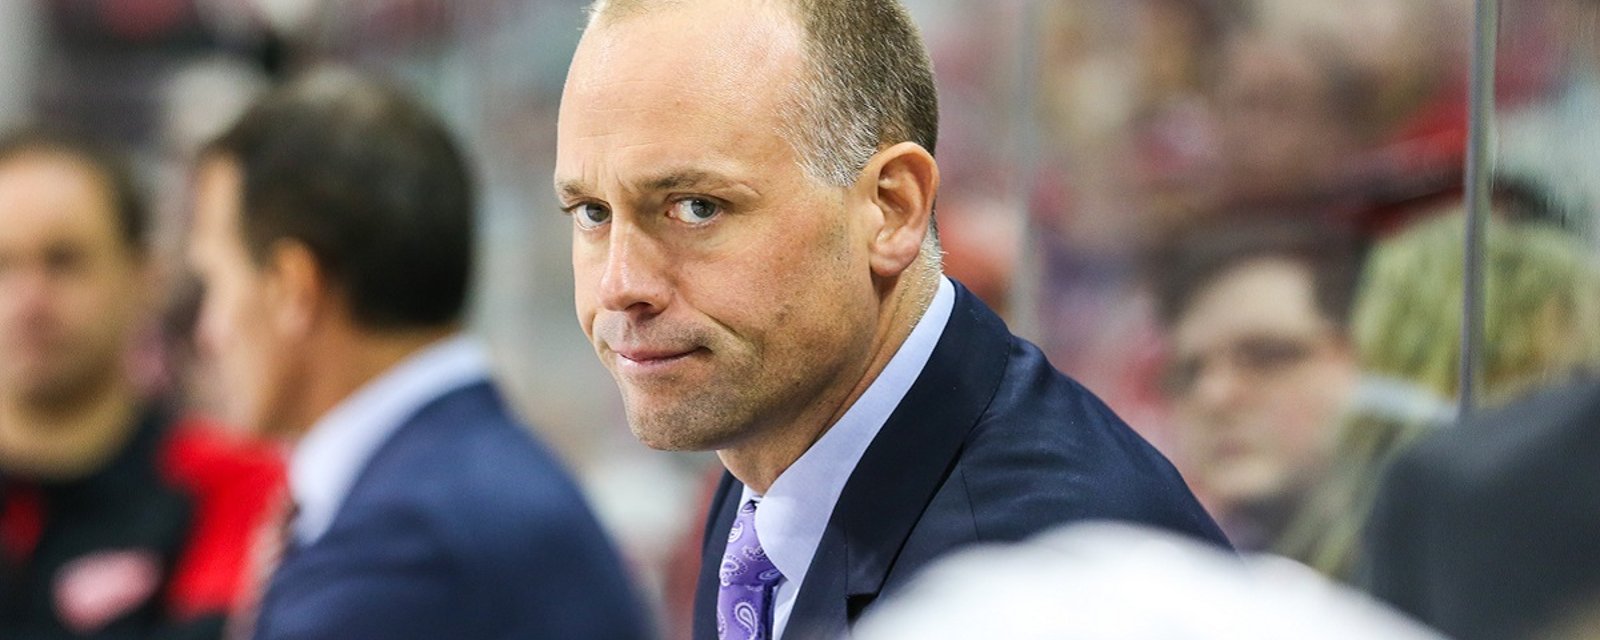 11 NHL head coaches on expiring or interim contracts.